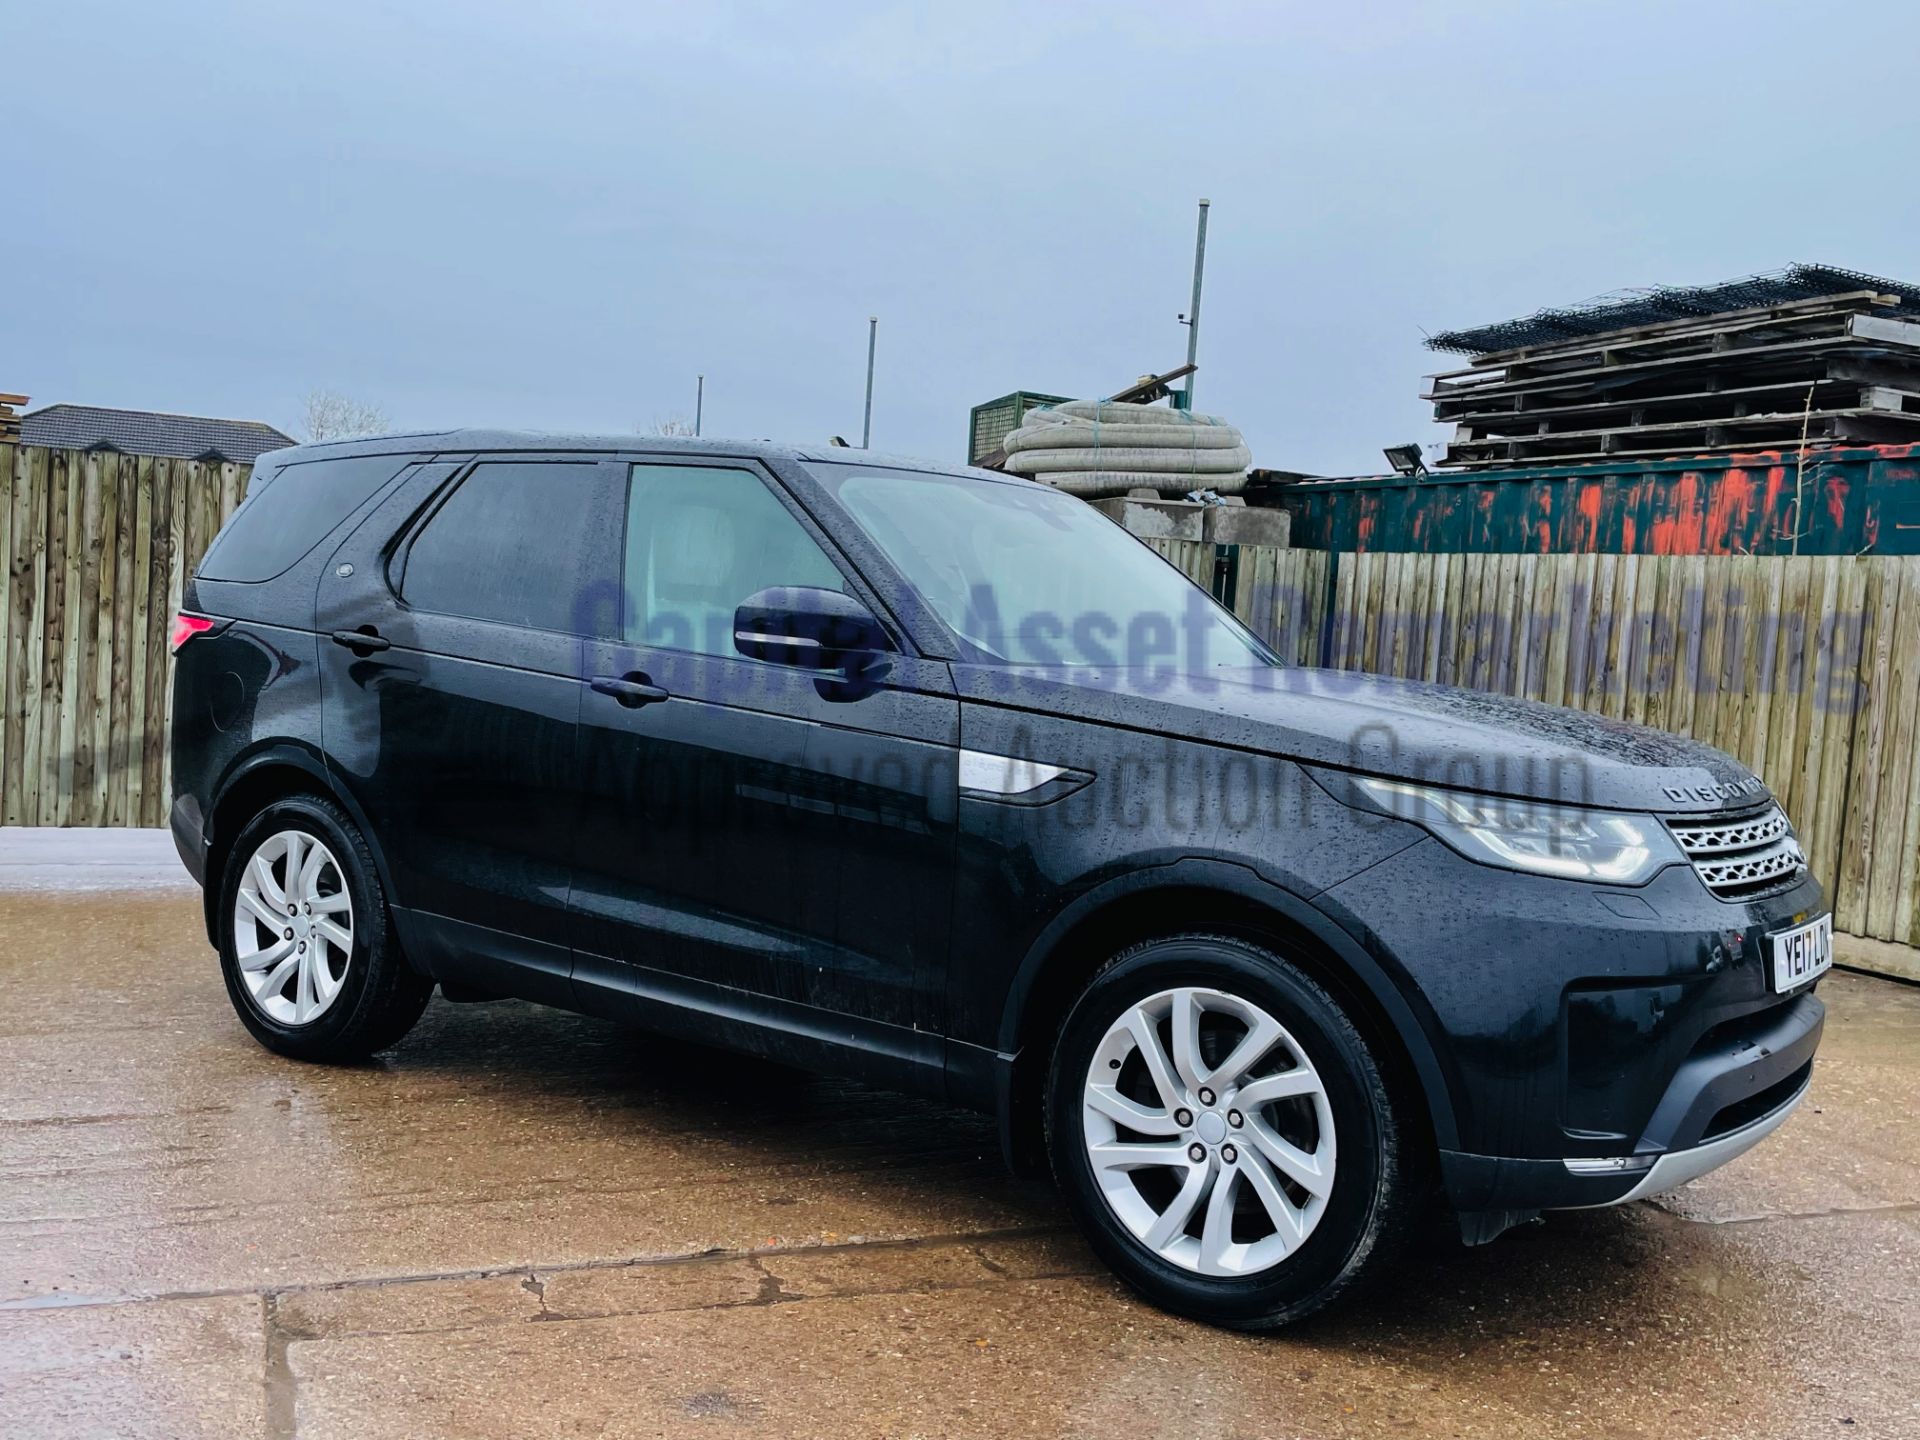 LAND ROVER DISCOVERY 5 *HSE EDITION* 7 SEATER SUV (2017 EURO 6) 8 SPEED AUTO - PAN ROOF *HUGE SPEC* - Image 3 of 64